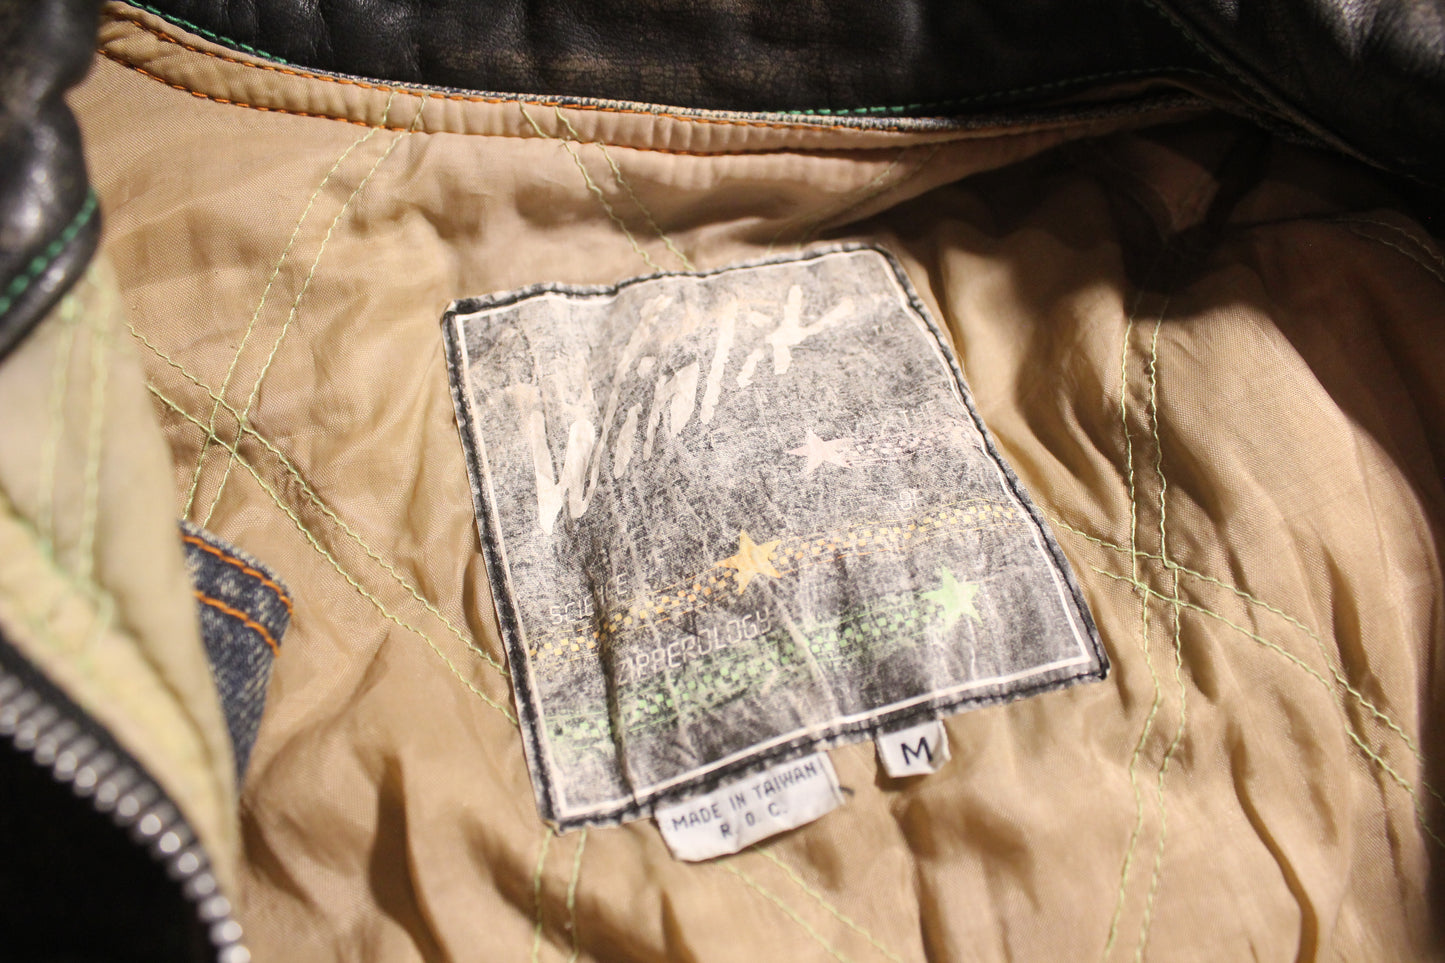 Denim and Leather "Zipperology" Jacket by Winlit, Size M